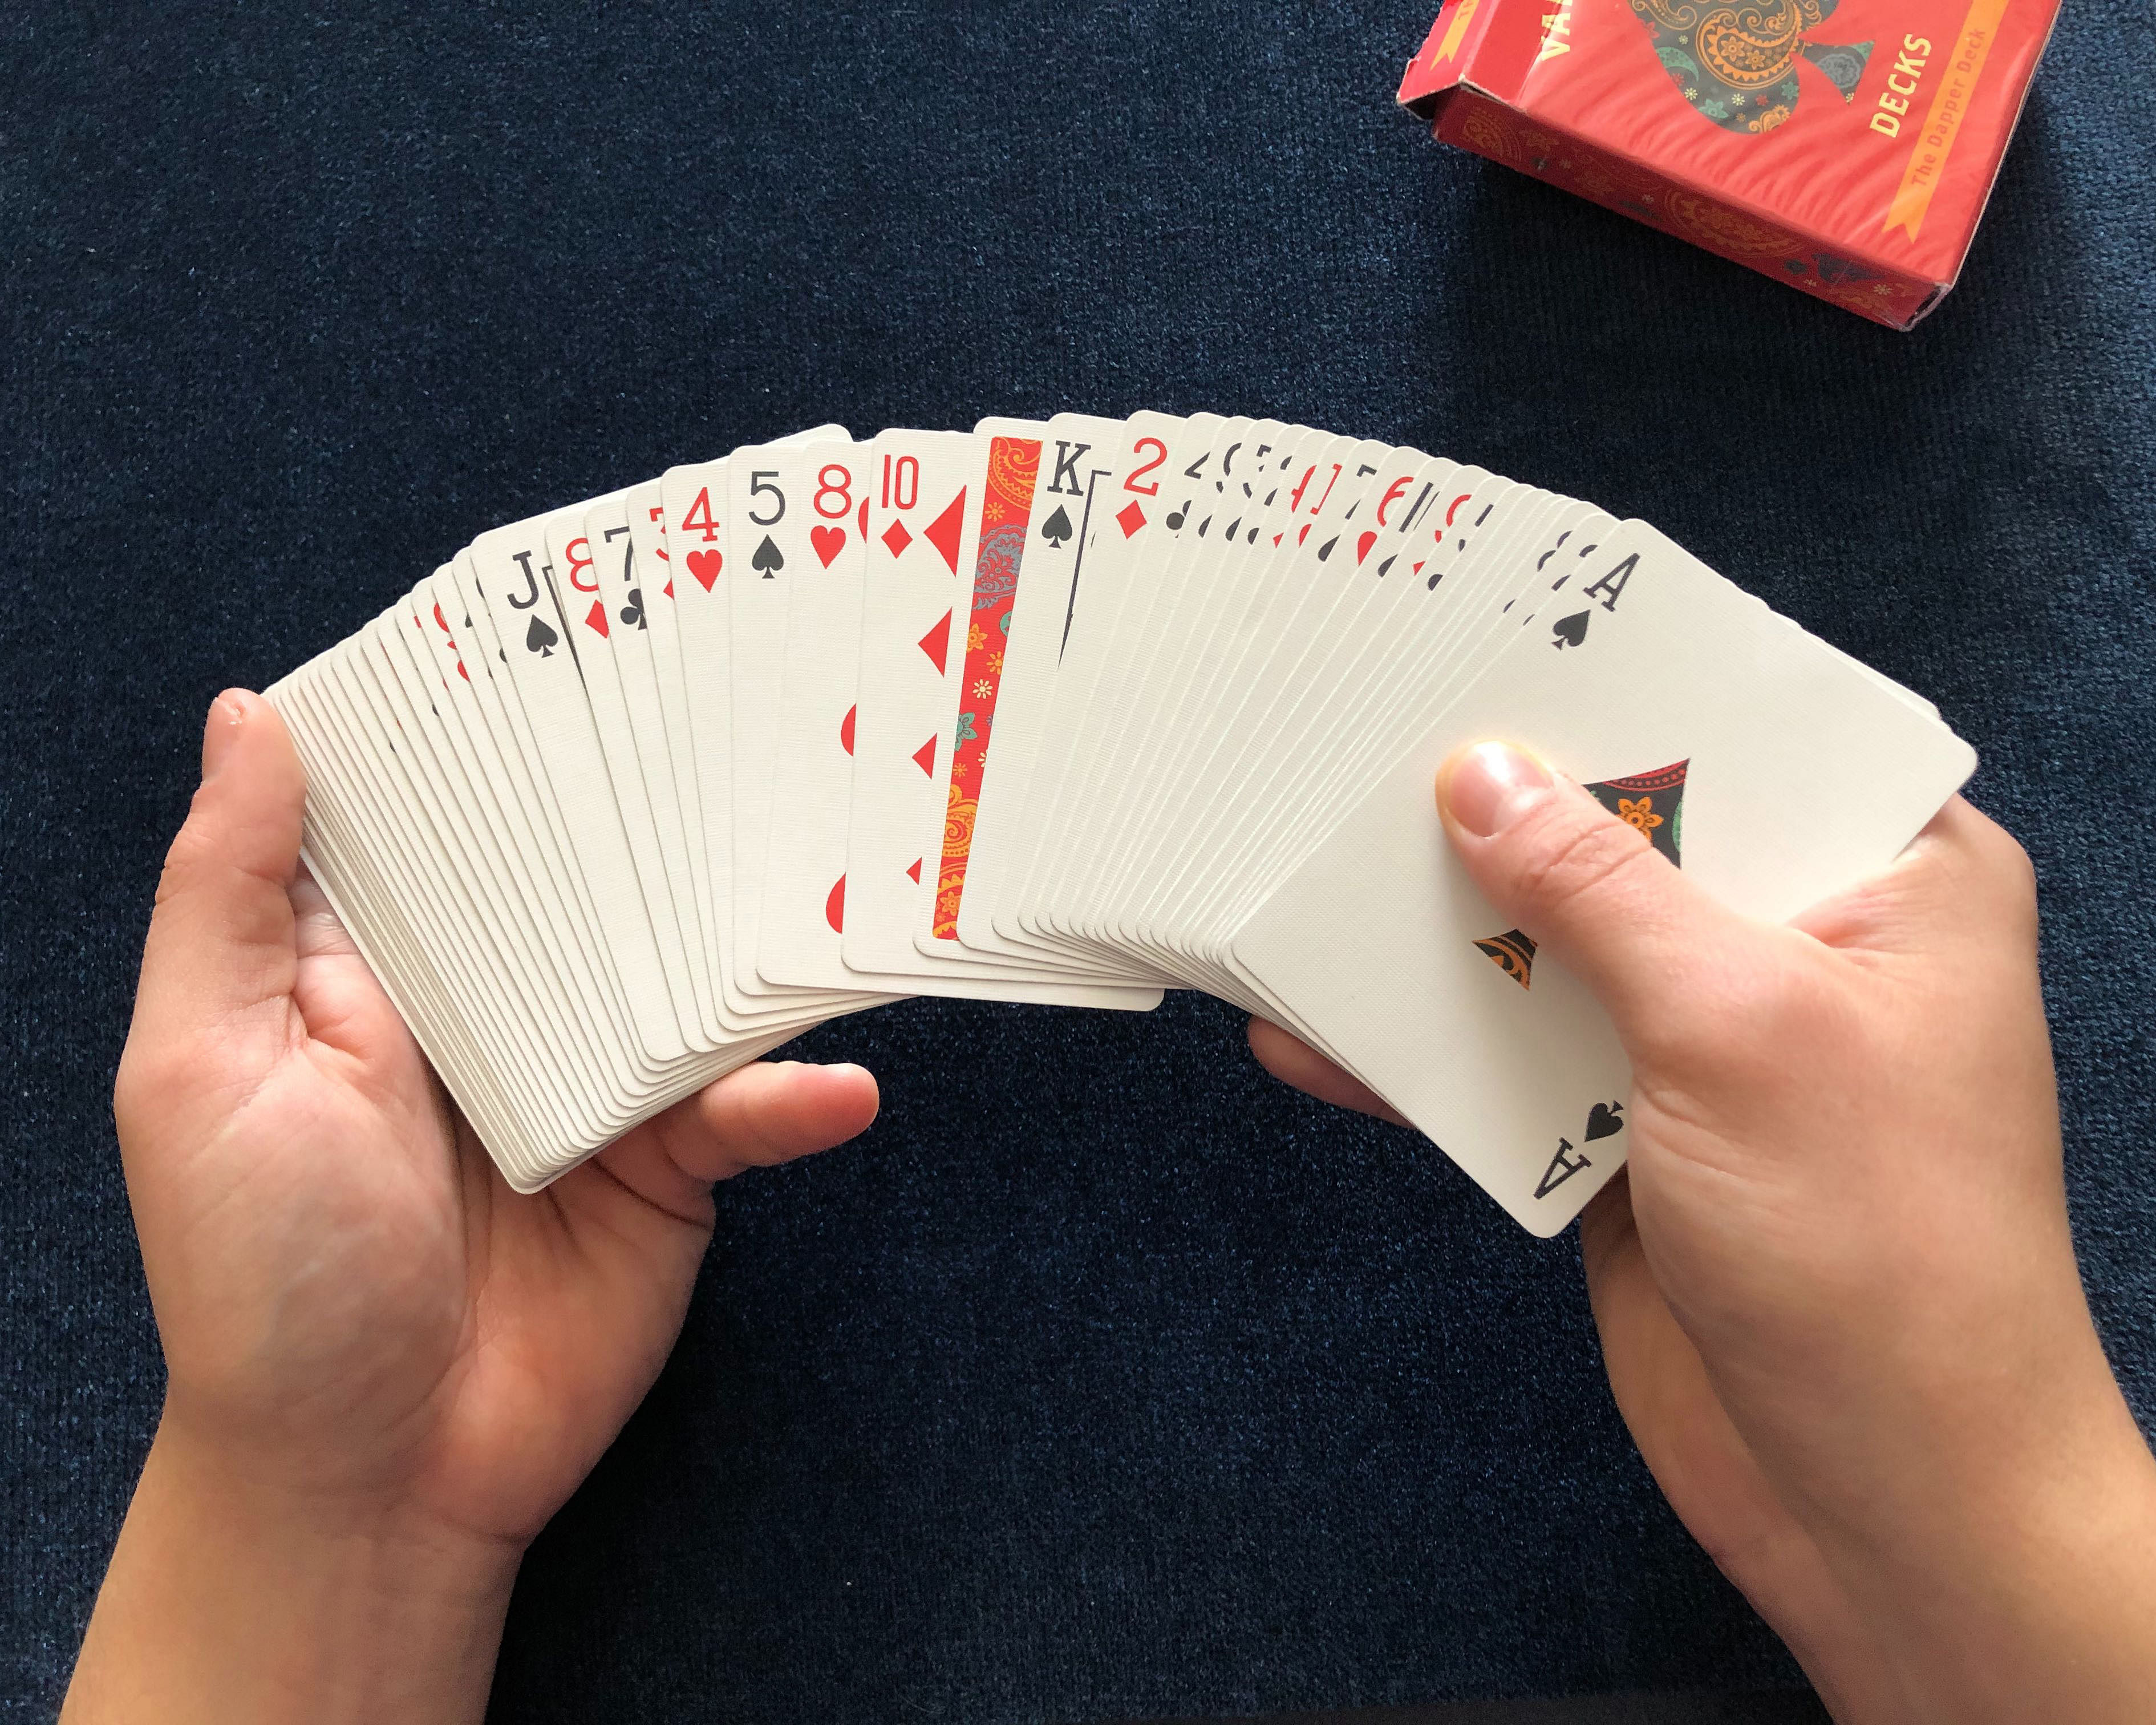 An easy card trick where one playing card turns over in a deck of cards is performed with The Dapper Deck Playing Cards from Vanishing Inc.